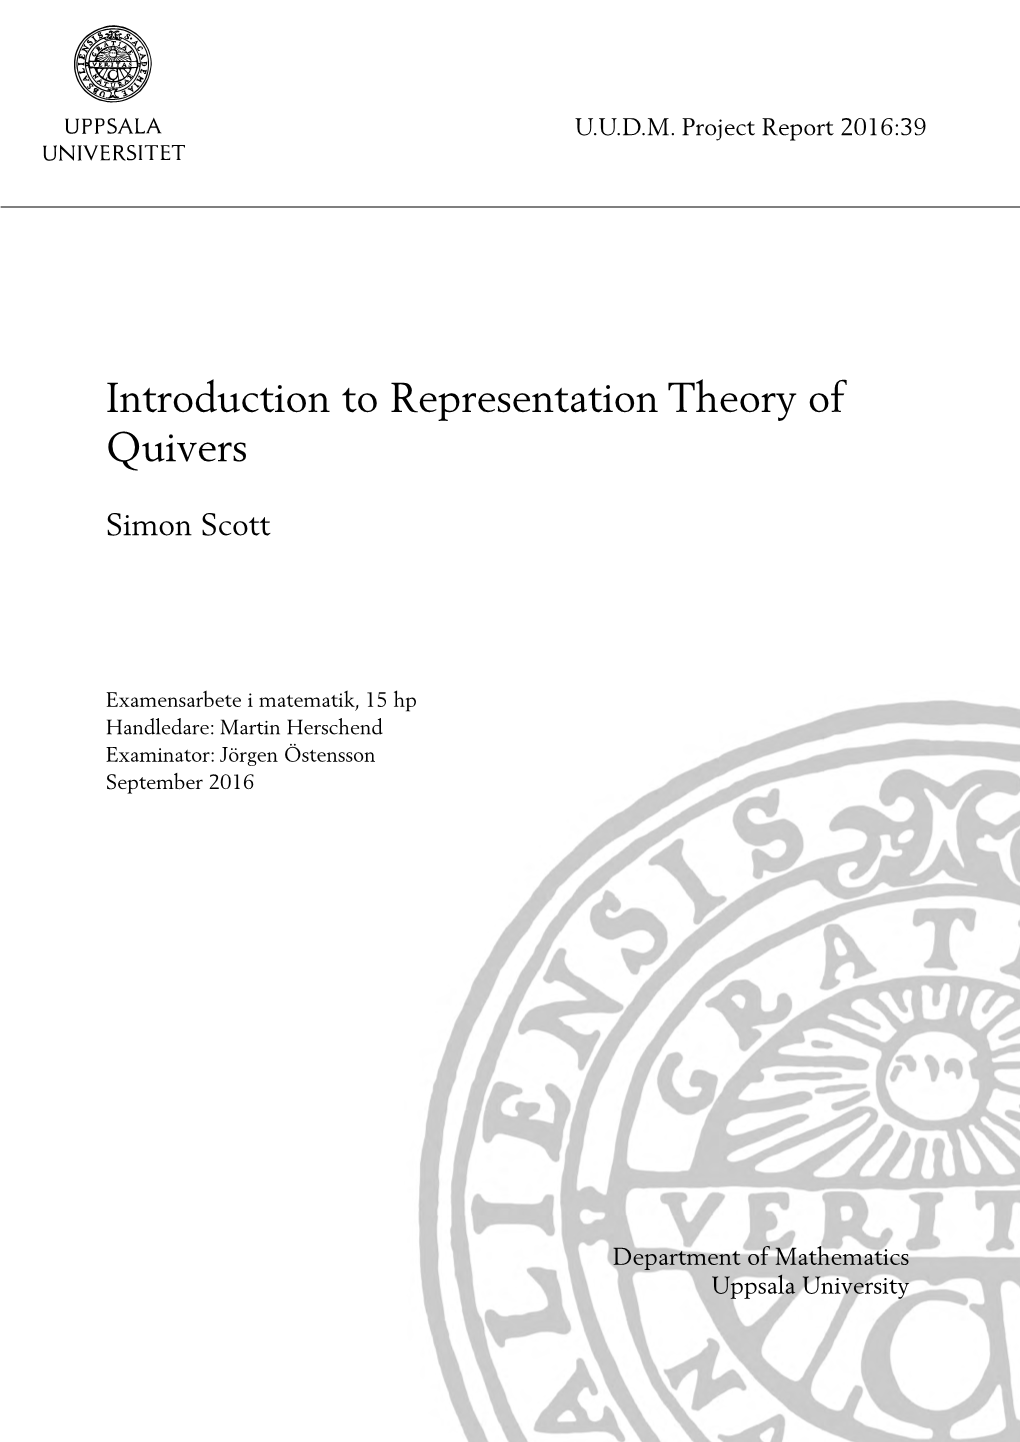 Introduction to Representation Theory of Quivers